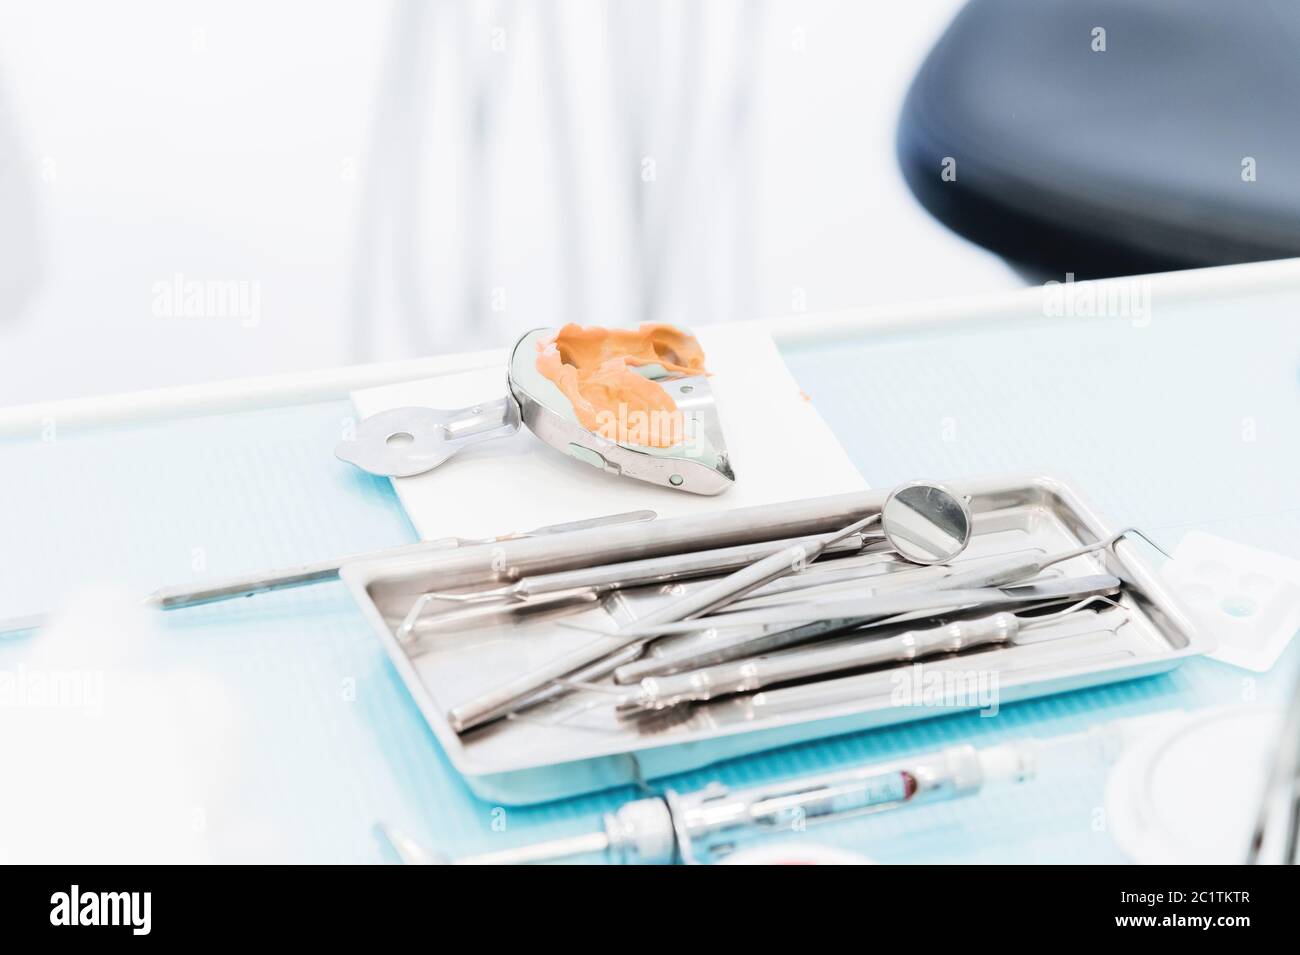 Close-up of a common stamotological instrument next to a metal form for prosthetics. Dental equipment. Dental hygiene and health Stock Photo